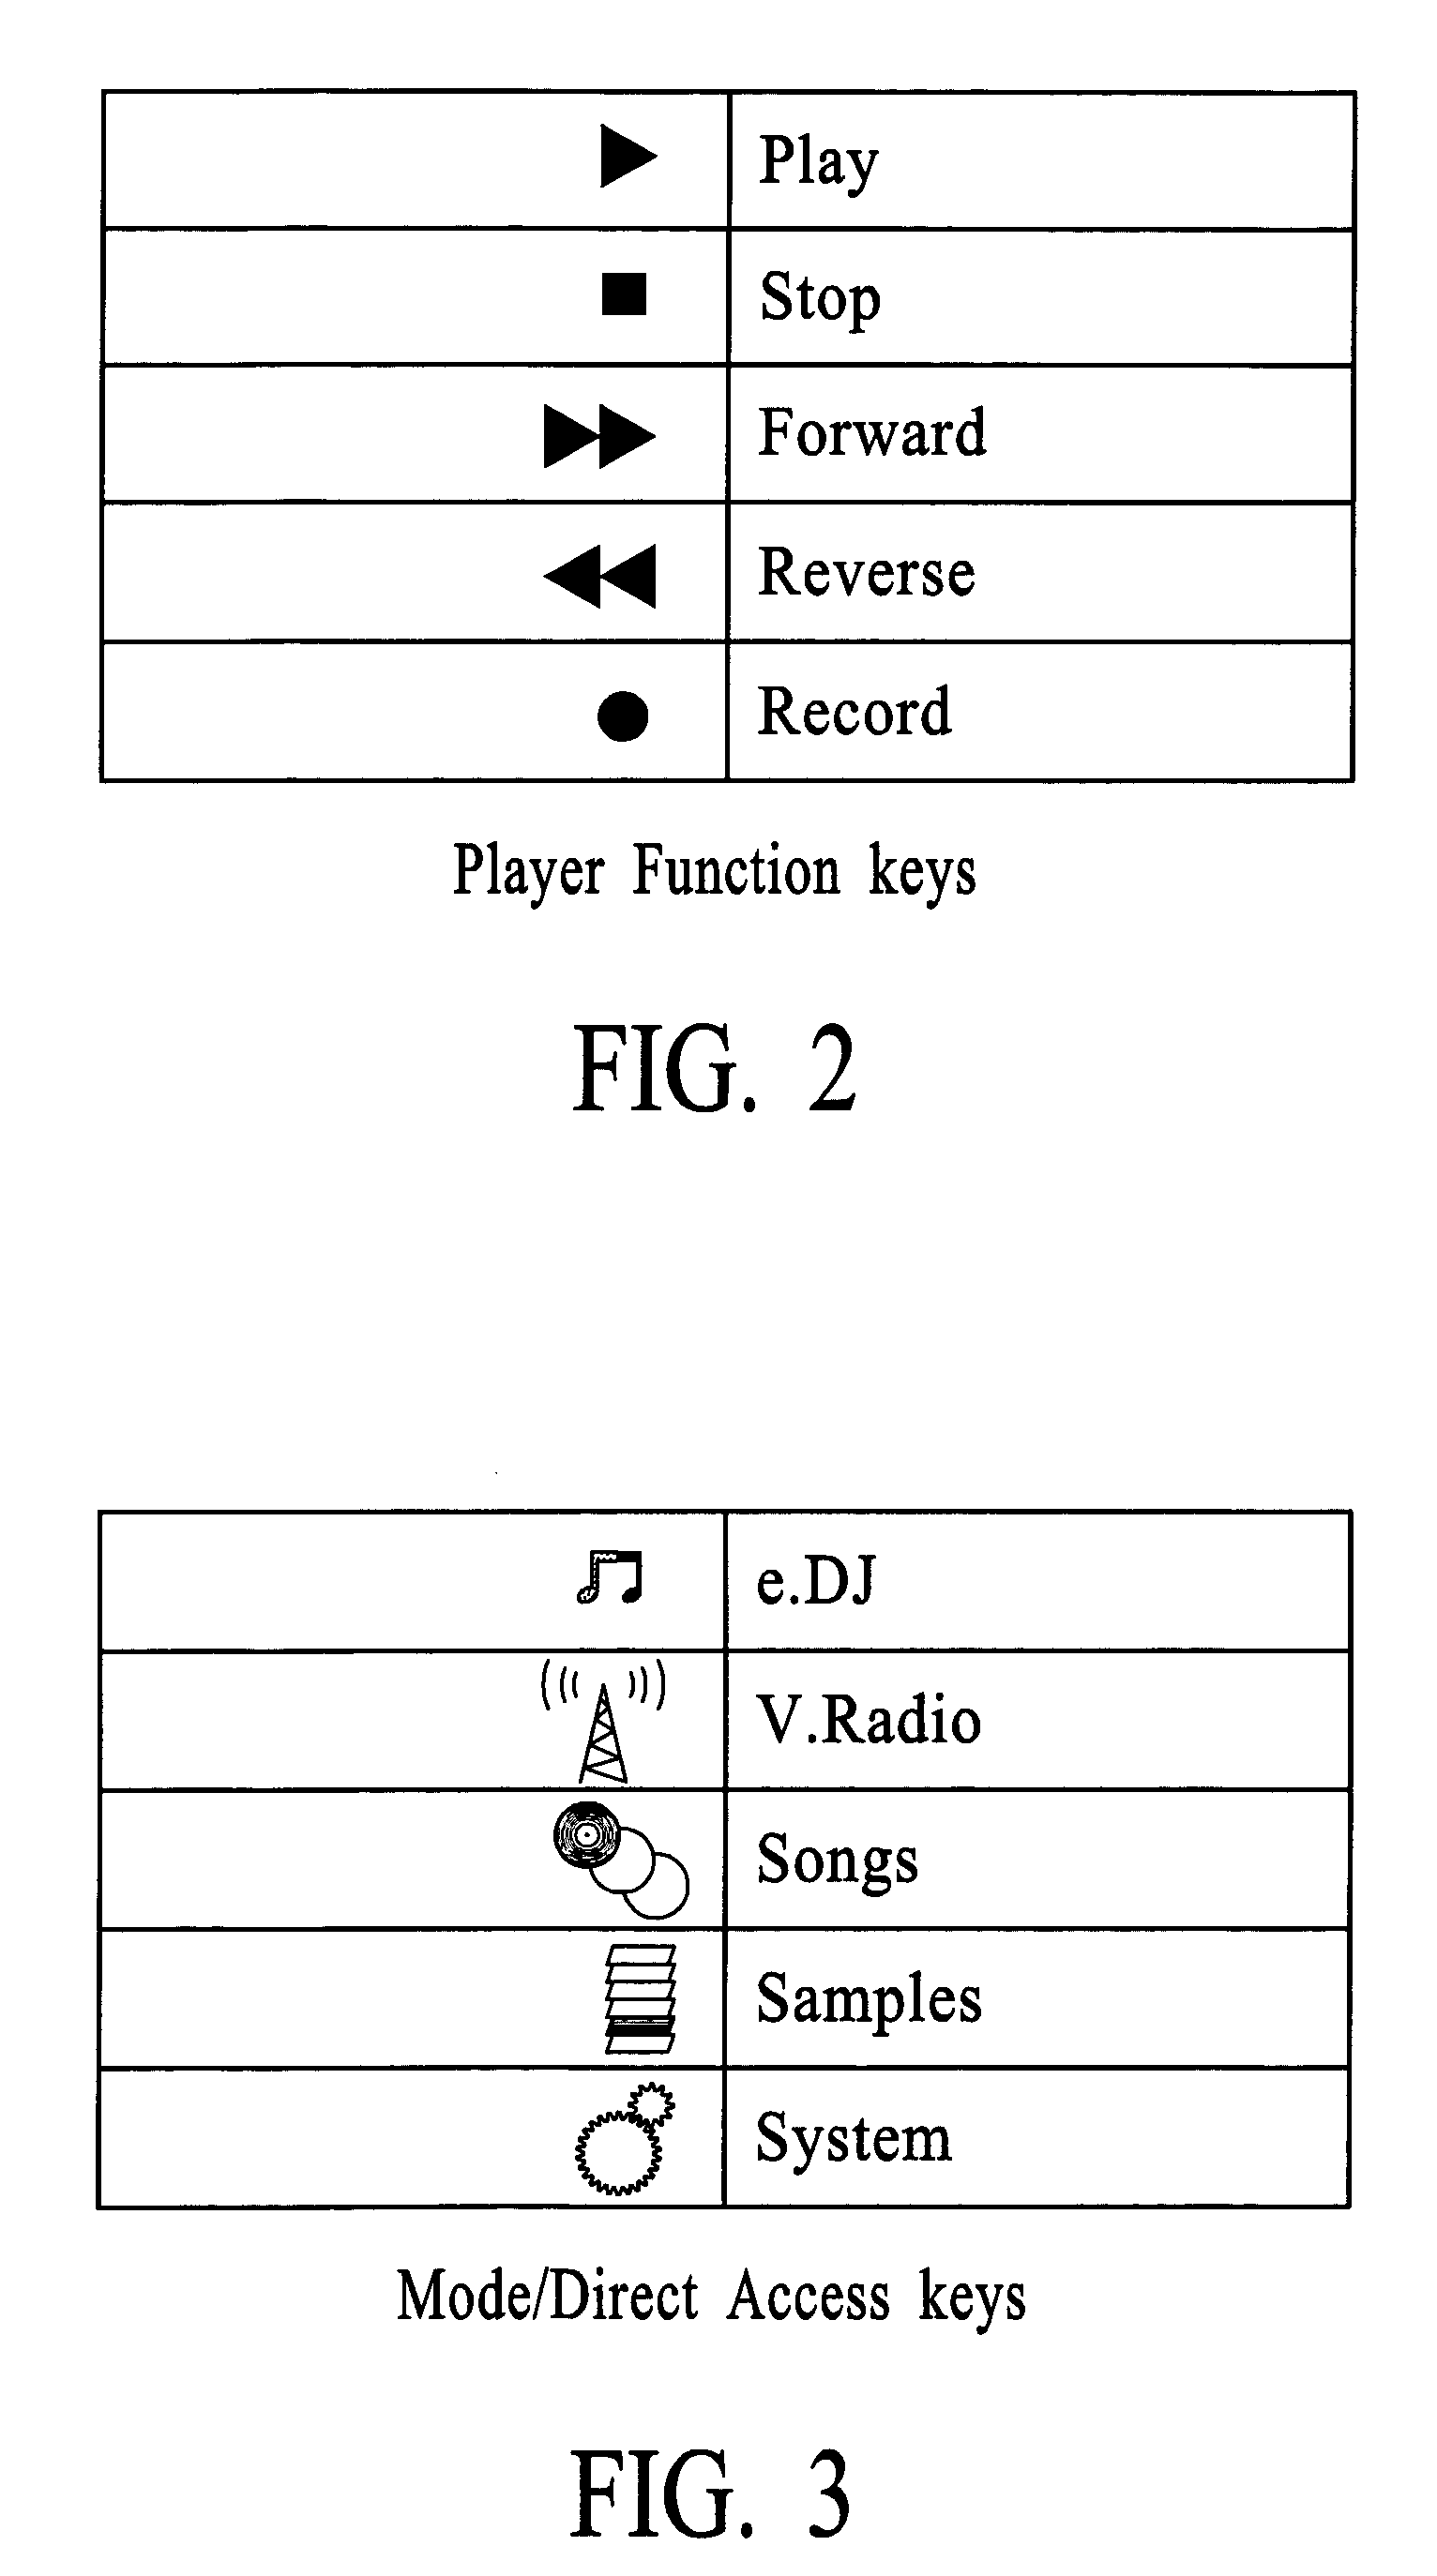 Systems and methods for generating music using data/music data file transmitted/received via a network